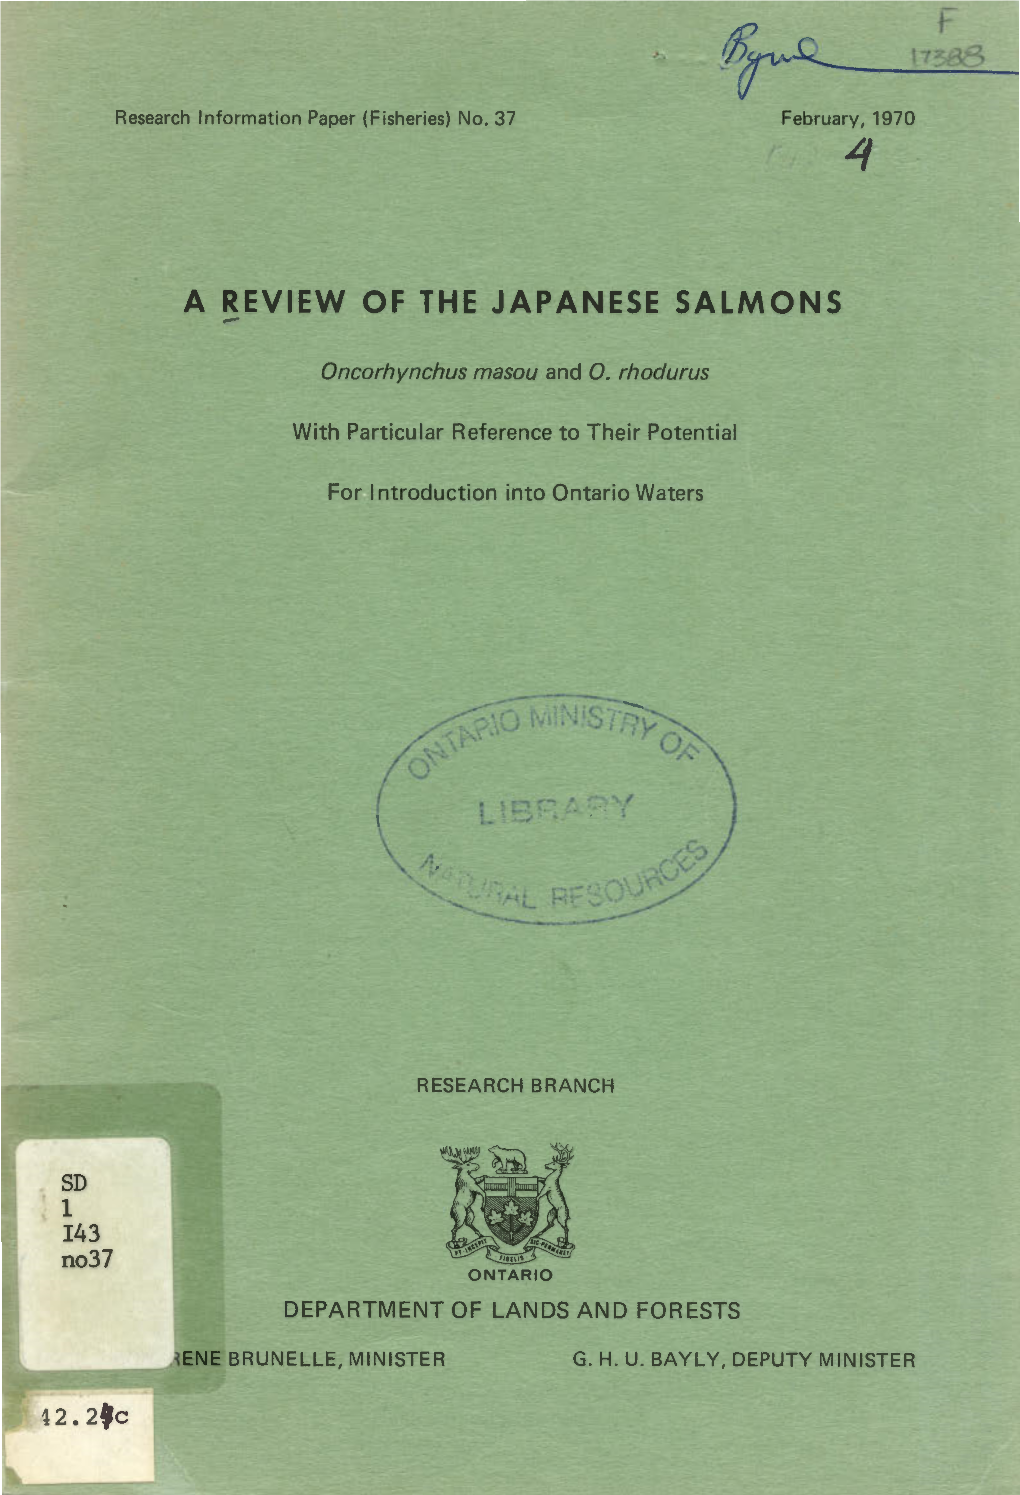 A Review of the Japanese Salmons